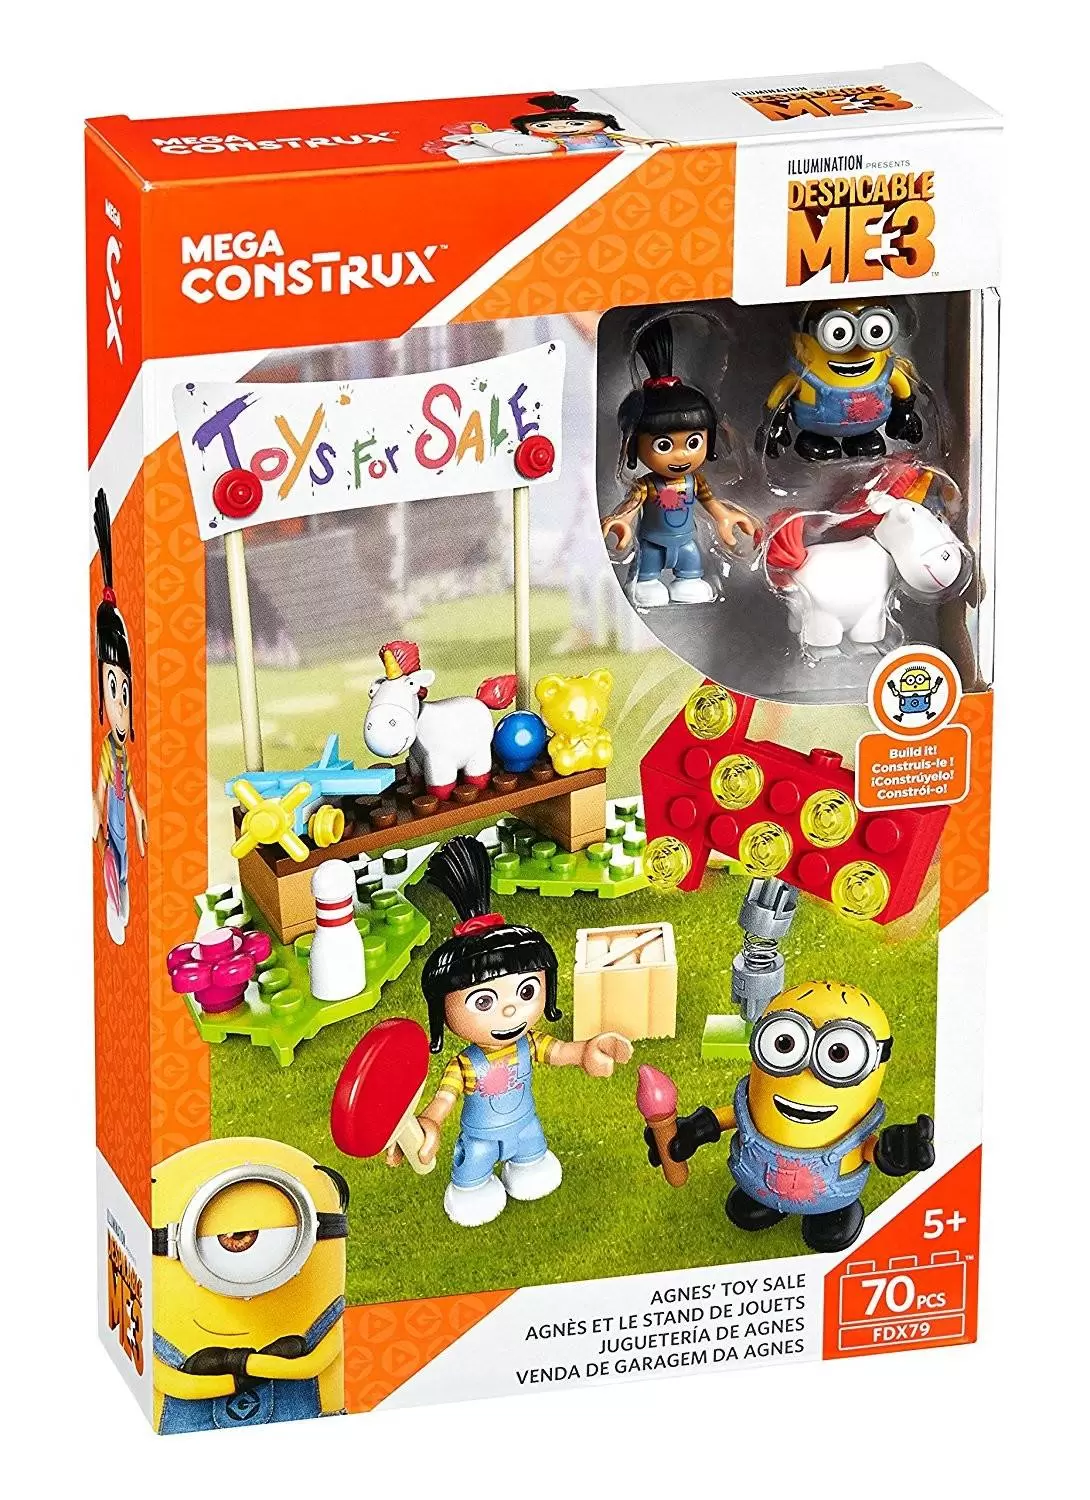 MEGA Construx Despicable ME Sets - Agnes and the toy stand